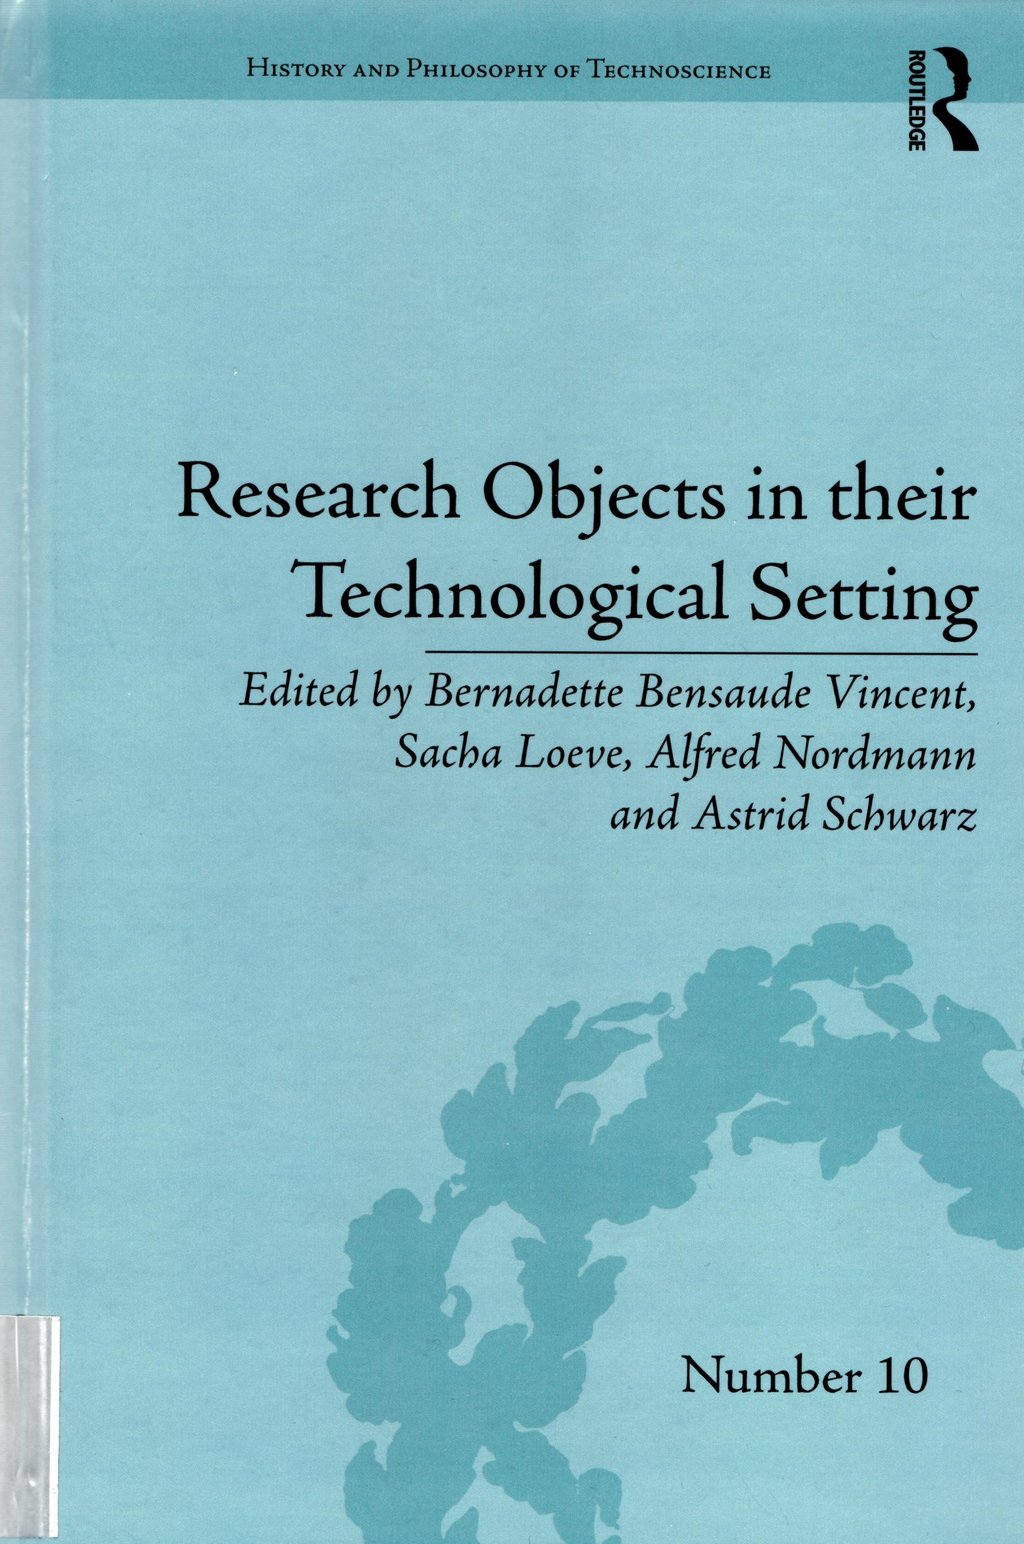 Research Objects in their Technological Setting